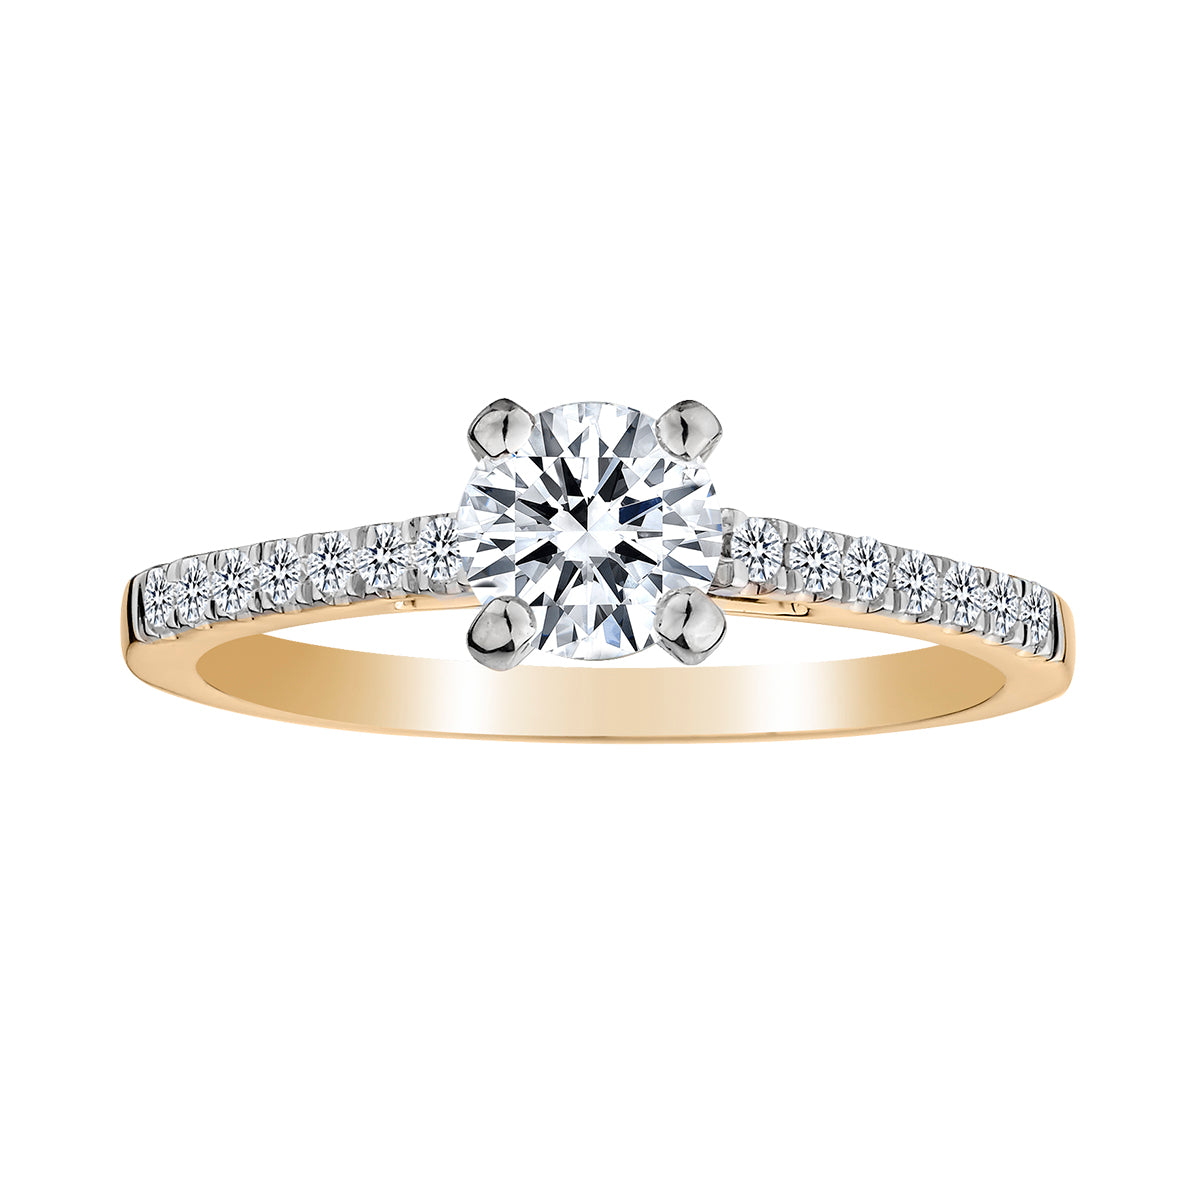 .87 Carat Total Diamond Weight, .70 Carat Centre Diamond Engagement Ring, 14kt Yellow Gold (Two Tone).......................NOW